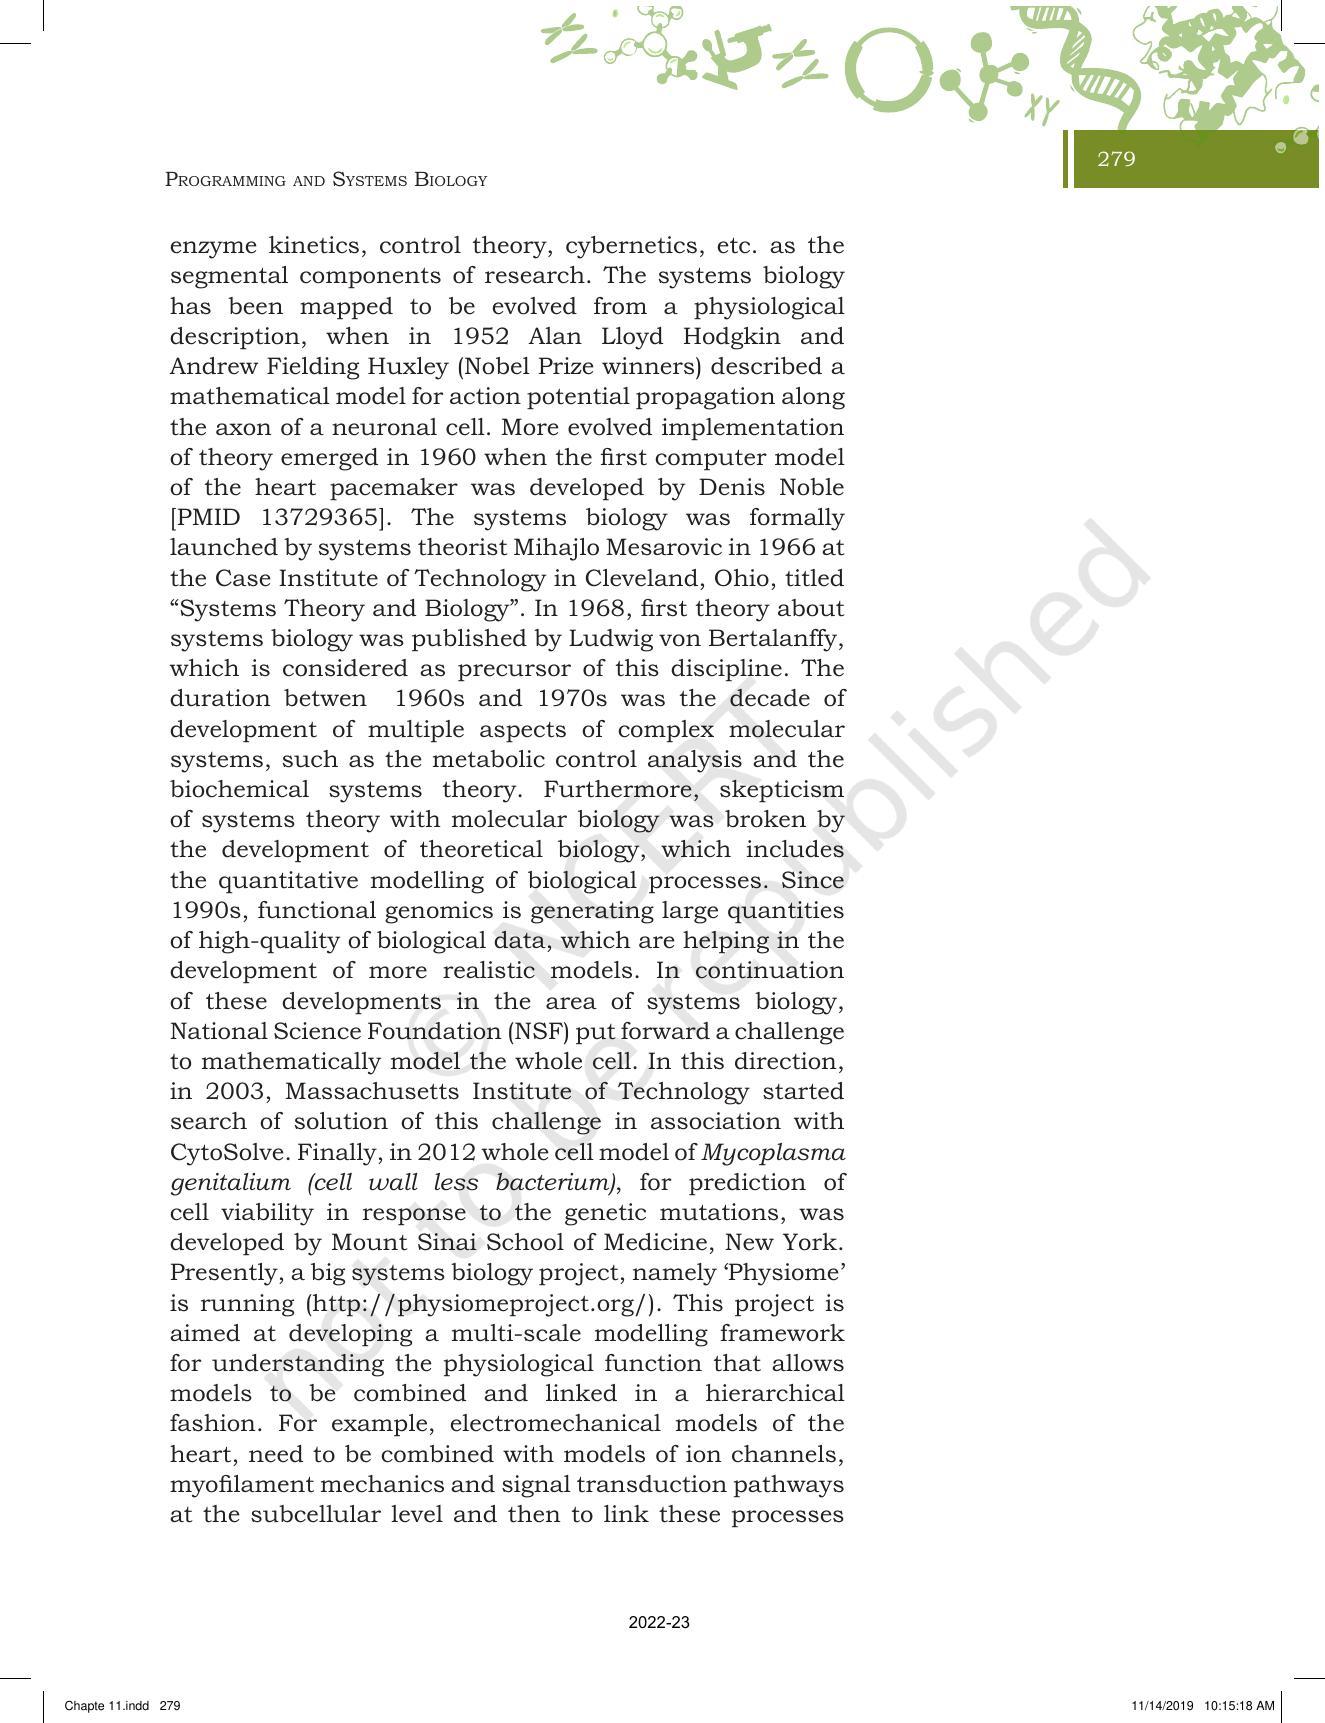 NCERT Book for Class 11 Biotechnology Chapter 11 Programming and Systems Biology - Page 4